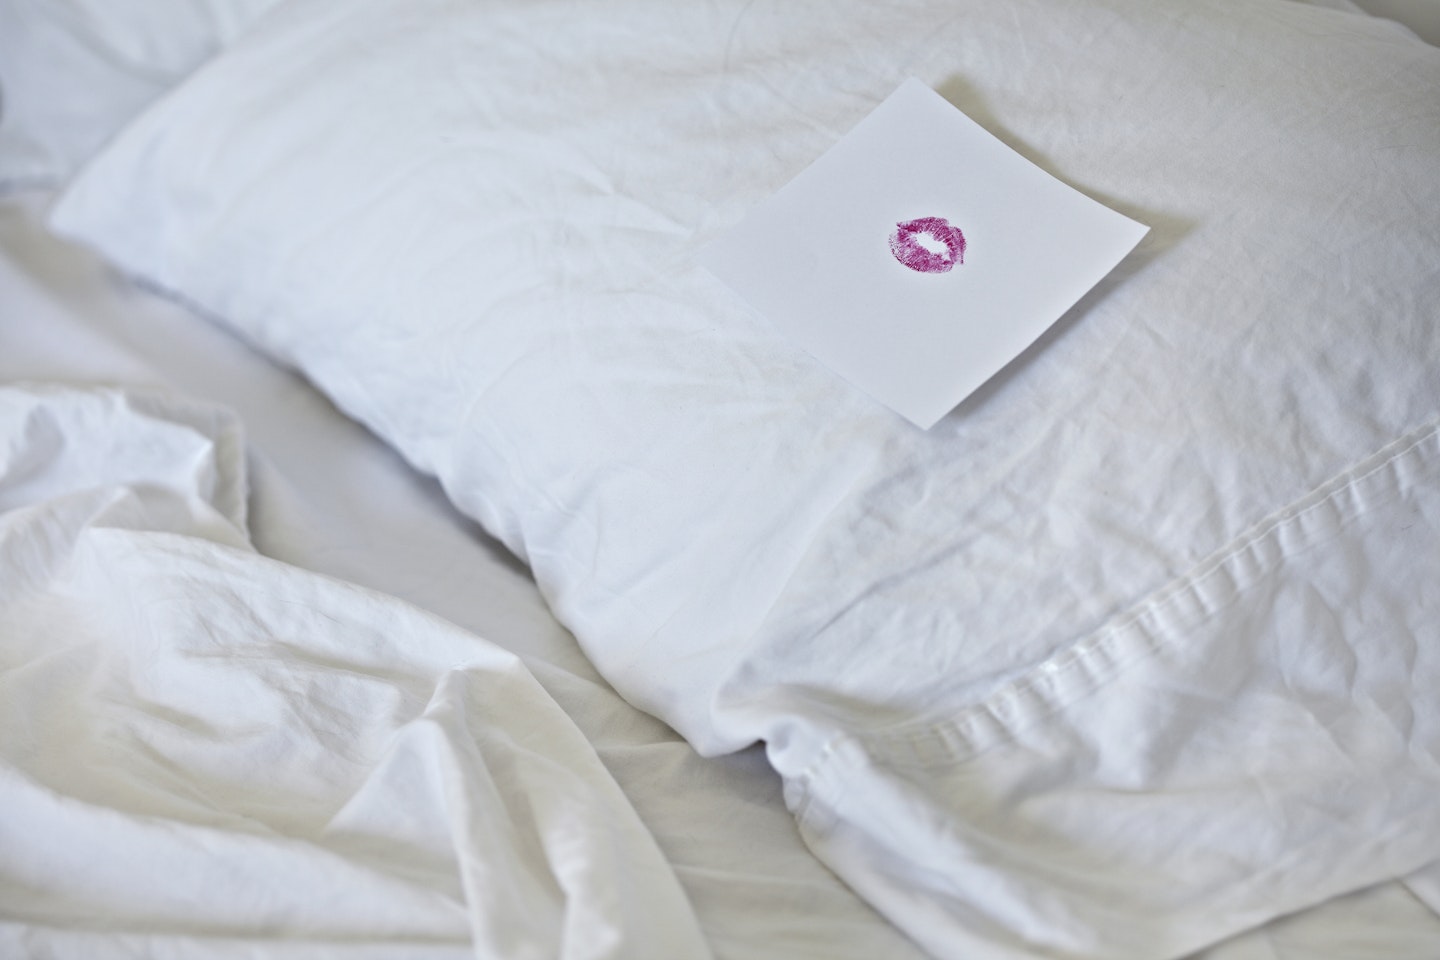 Note on bed